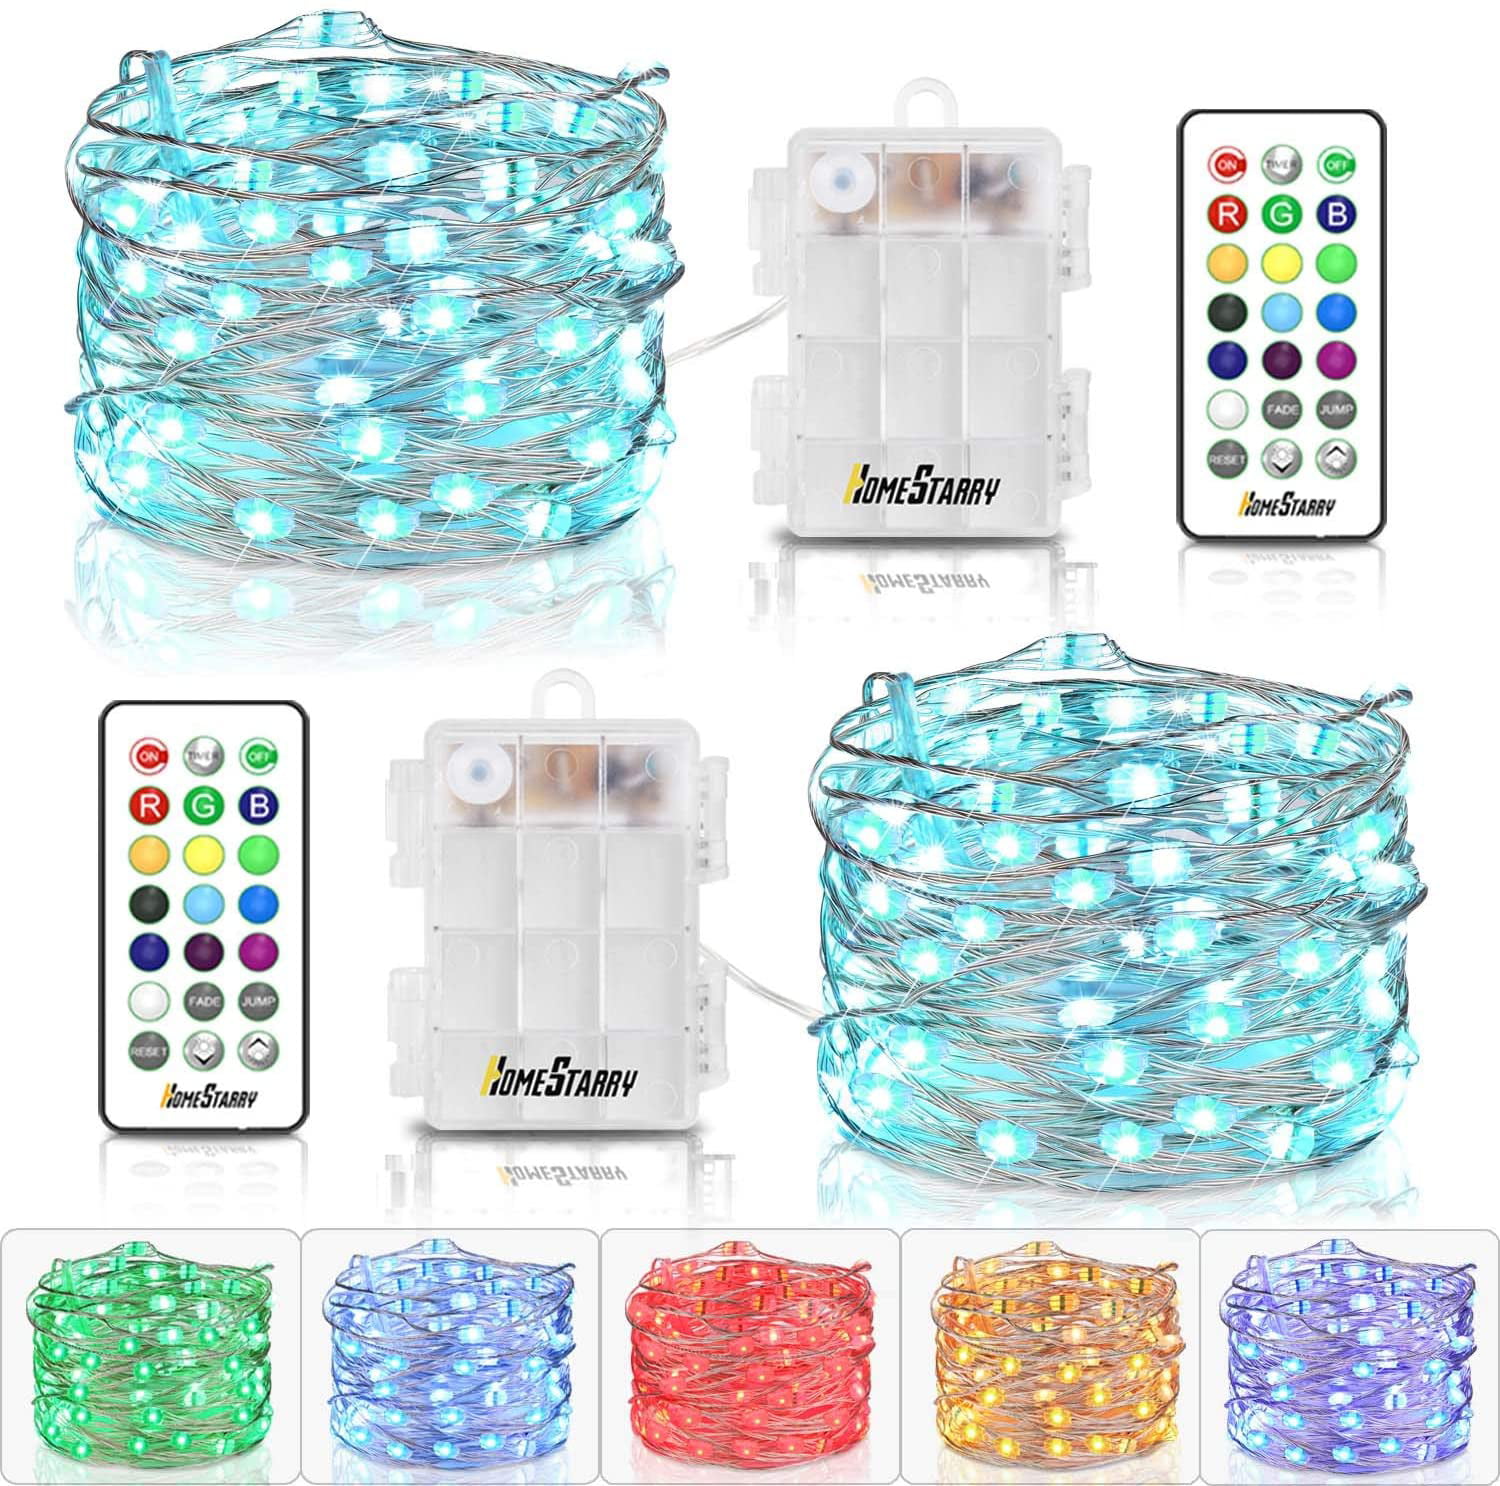 String Lights for Bedroom Christmas Wedding Party Decor Fairy String Lights Battery Operated & USB Plug-in 33Ft 100 LEDs 16 Color Changing Lights and 8 Lights Mode Remote Waterproof 3AA Battery Case 